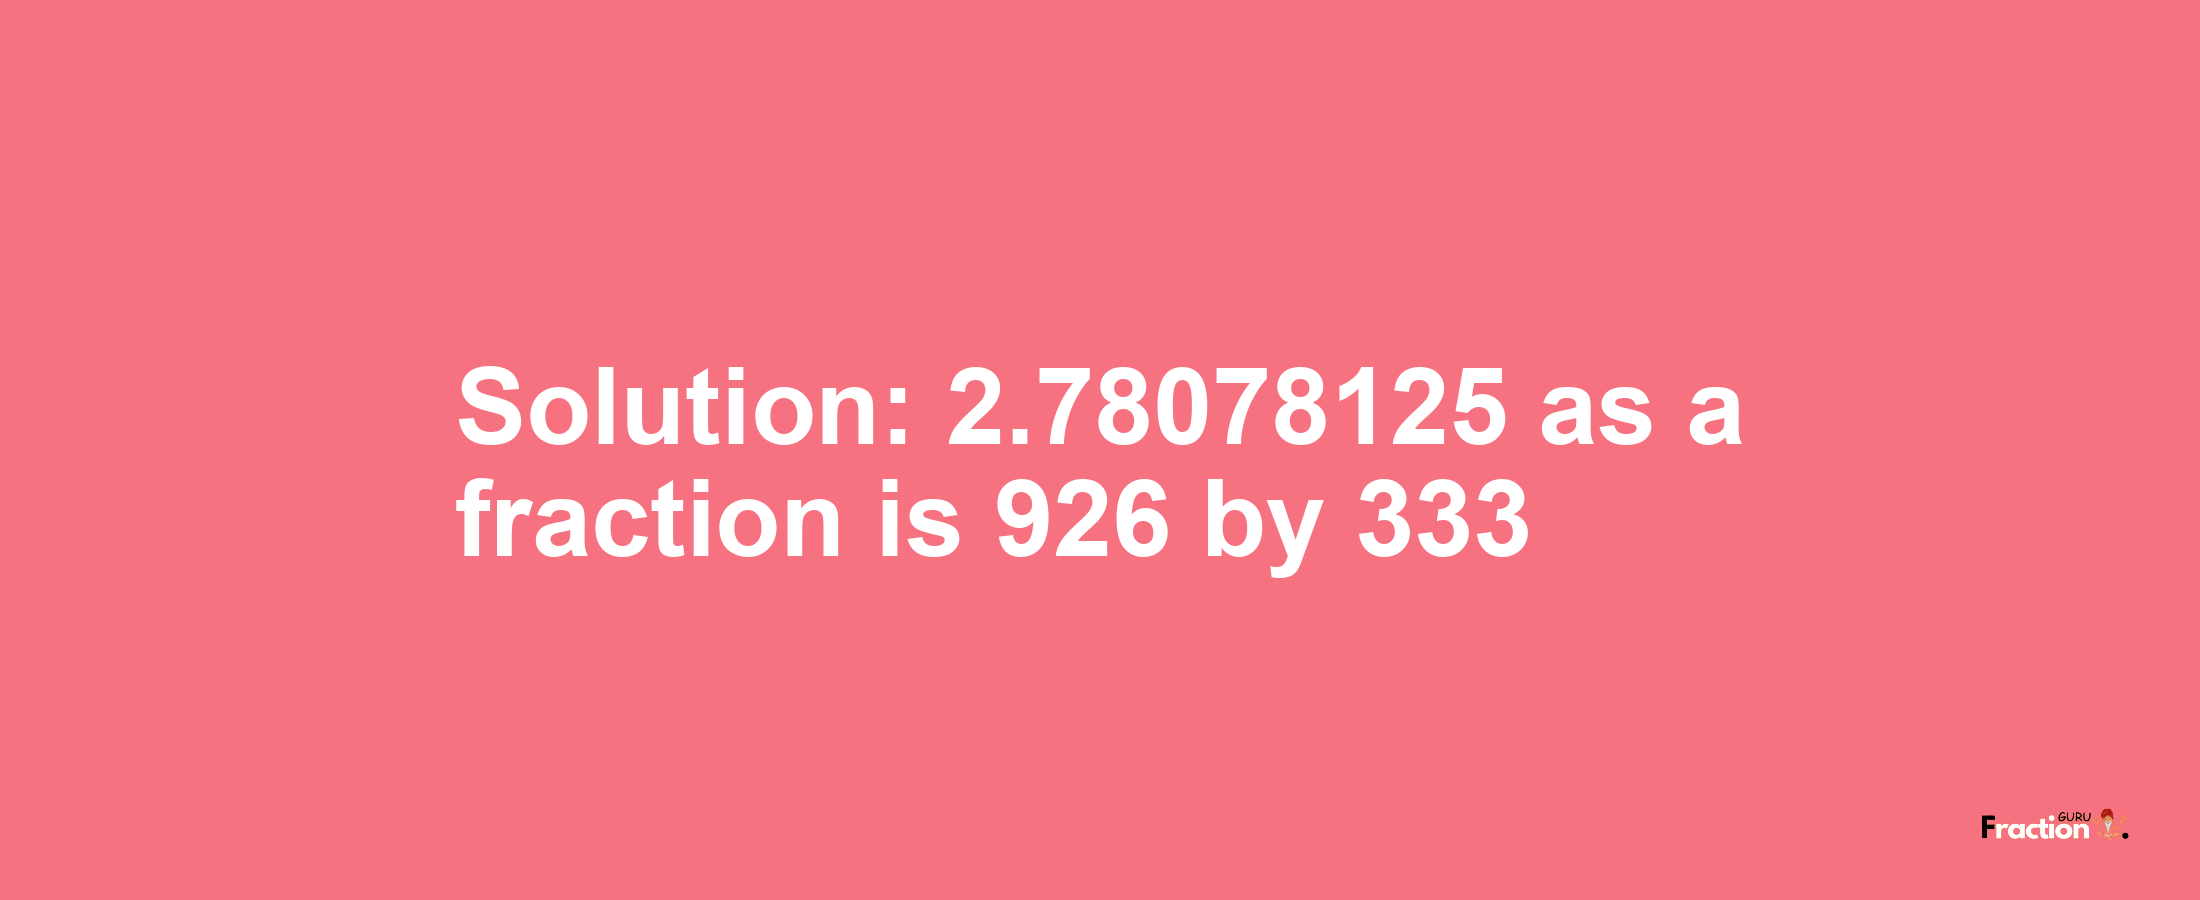 Solution:2.78078125 as a fraction is 926/333